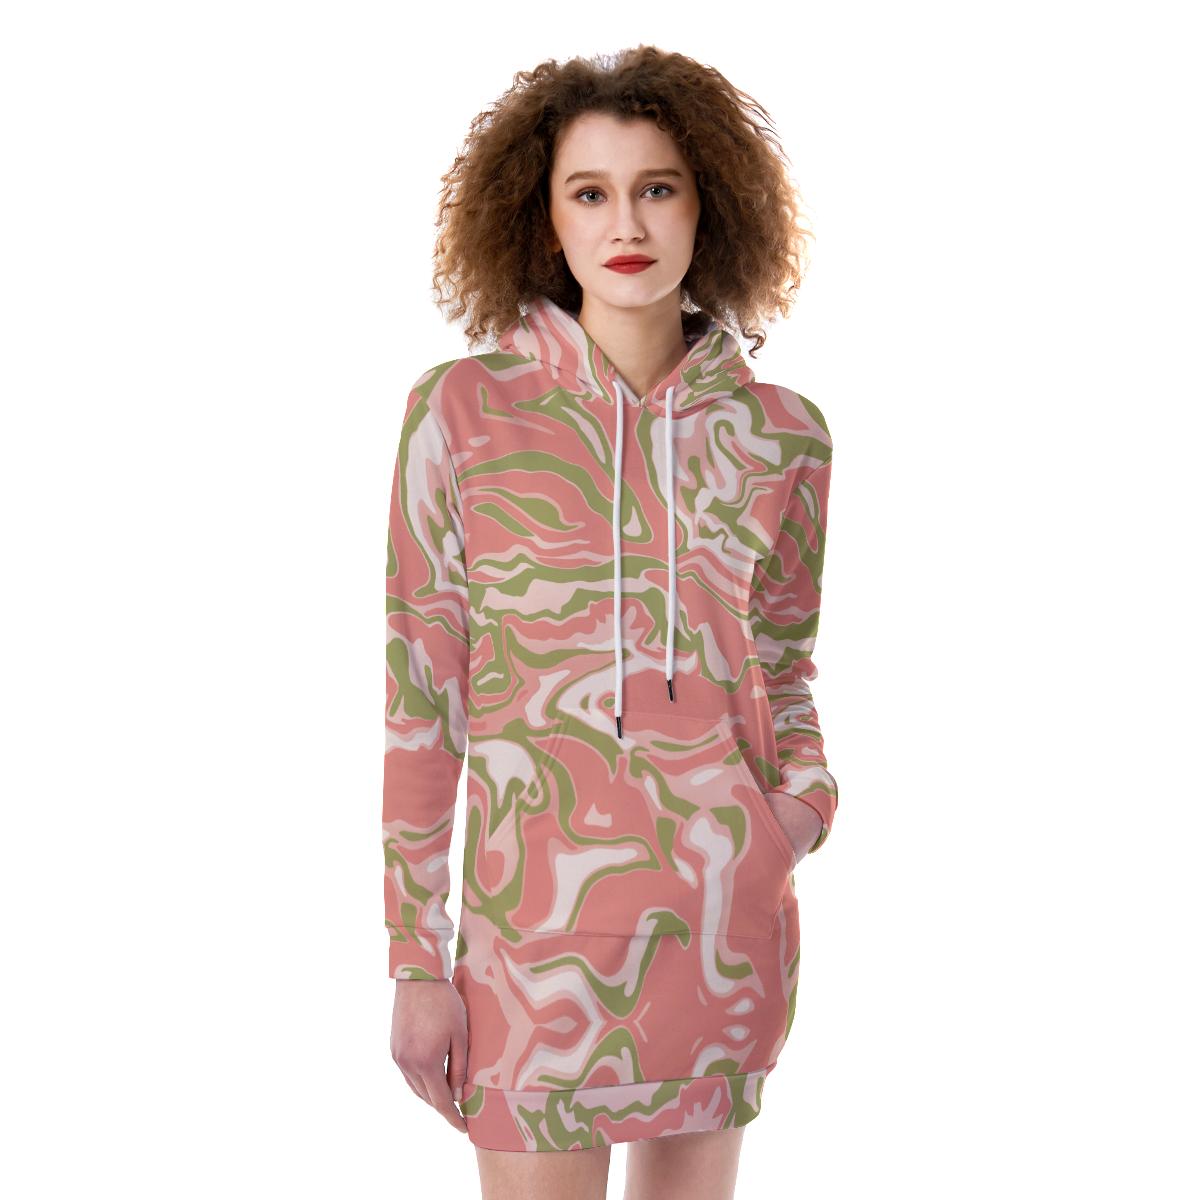 Coral Pink Camo Camouflage Abstract Liquid Print Women's Long Hoodie With Plush Fleece